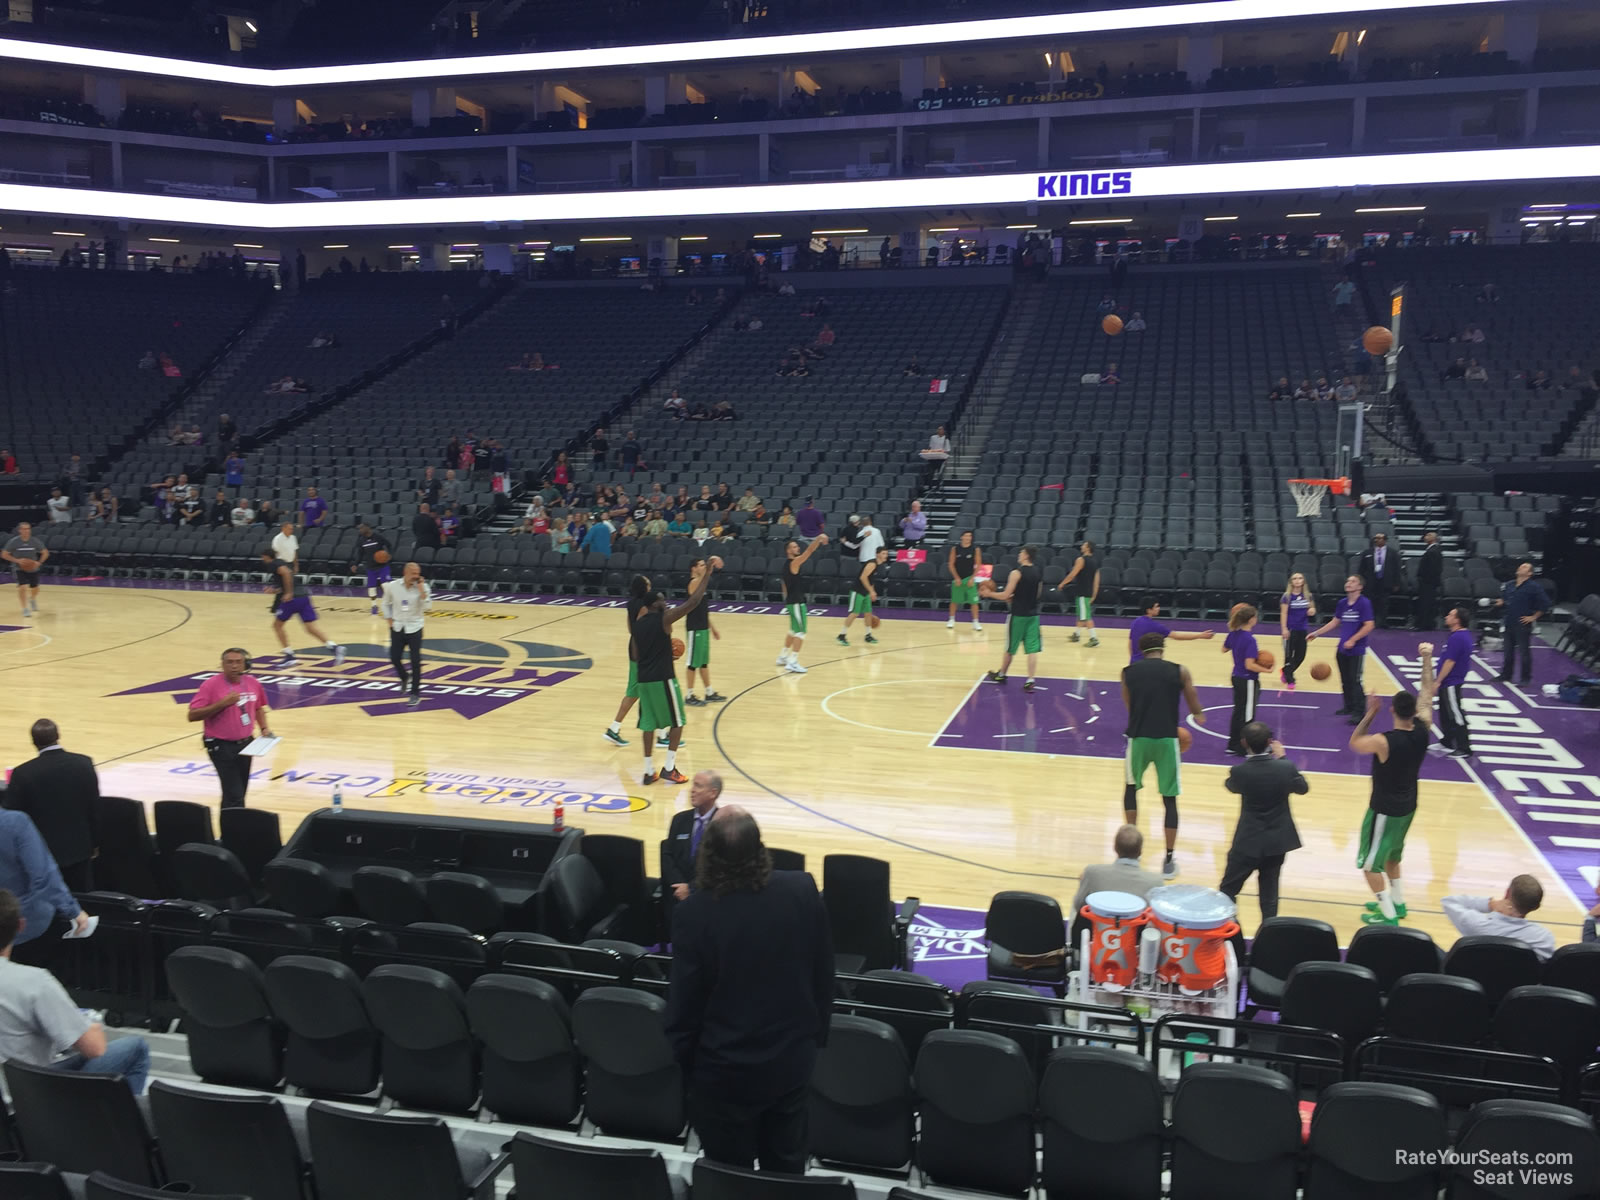 Section 106 at Golden 1 Center 